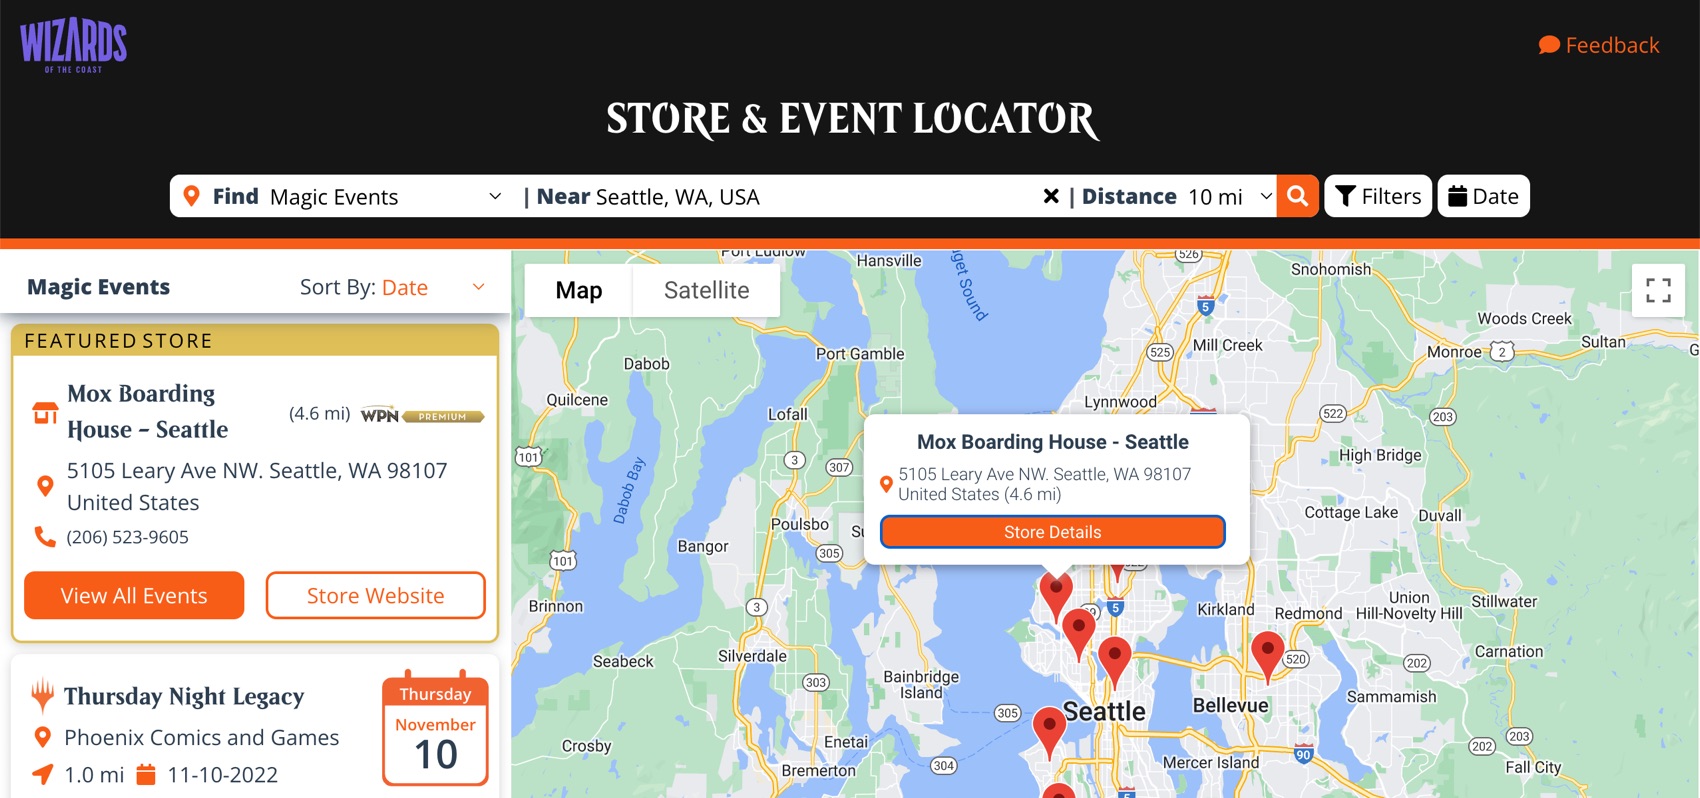 Locator showing tooltip with selected store's location information